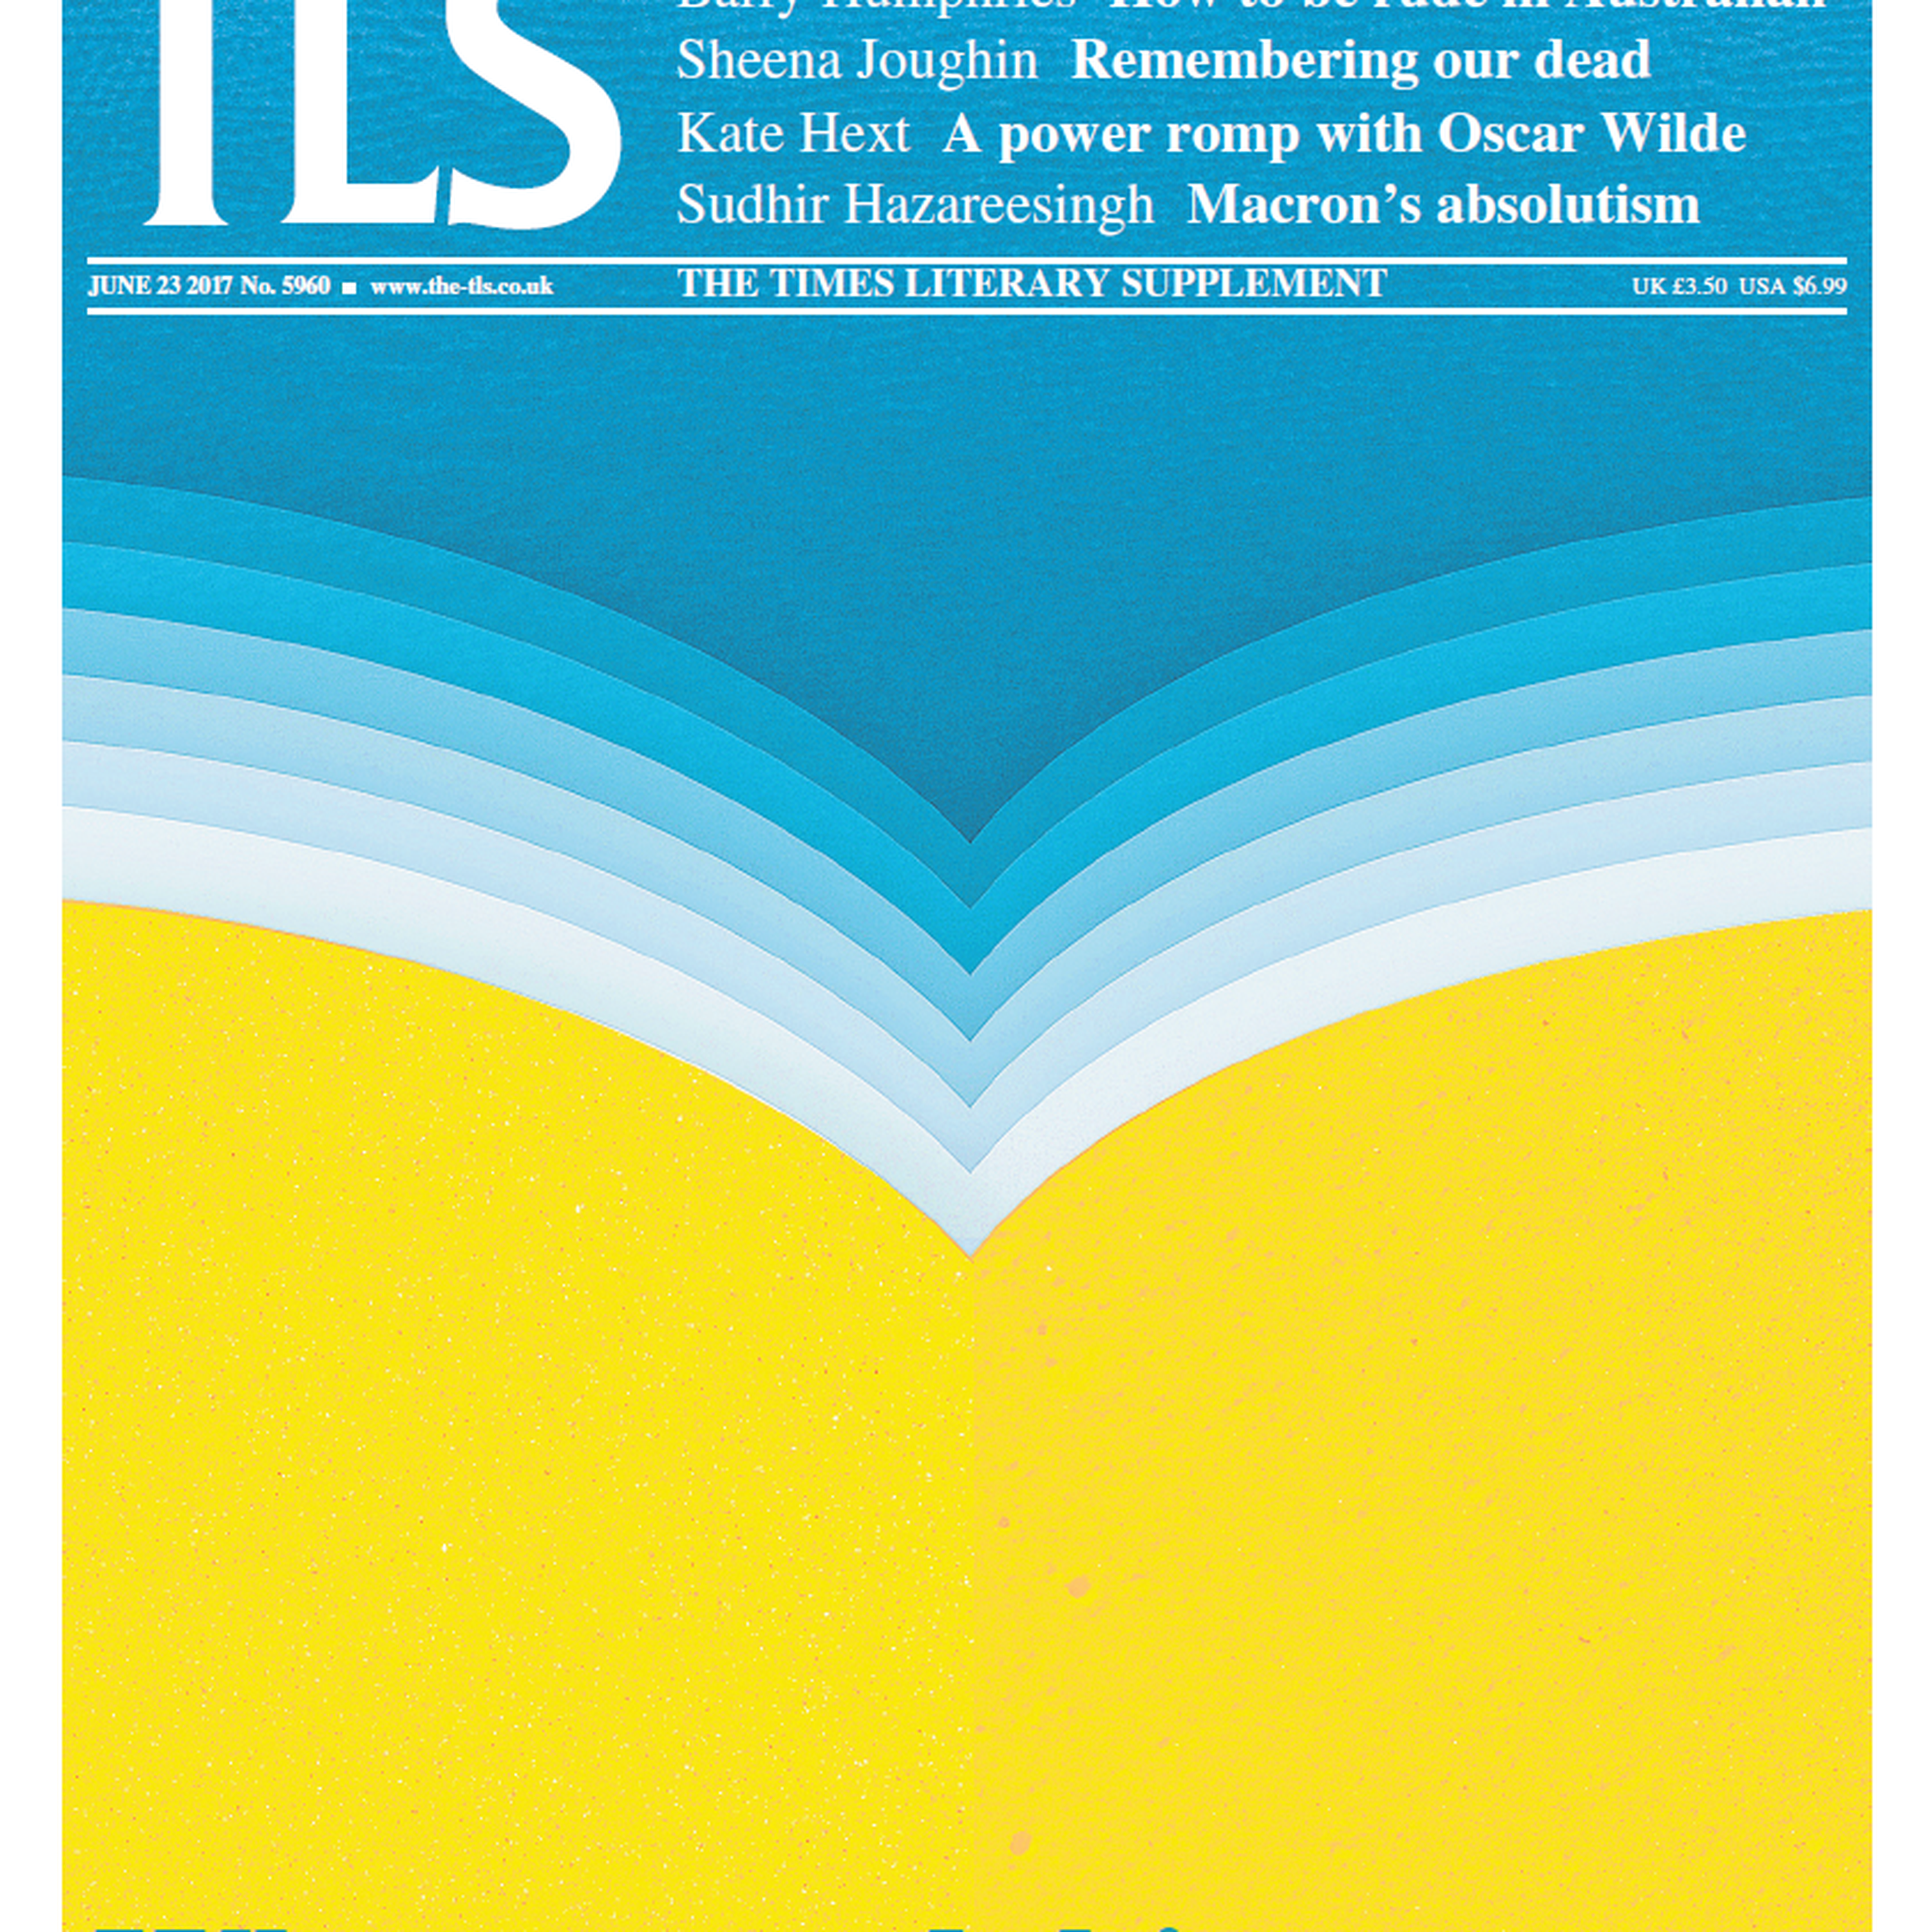 What to read this summer: an almost-legendary TLS special edition